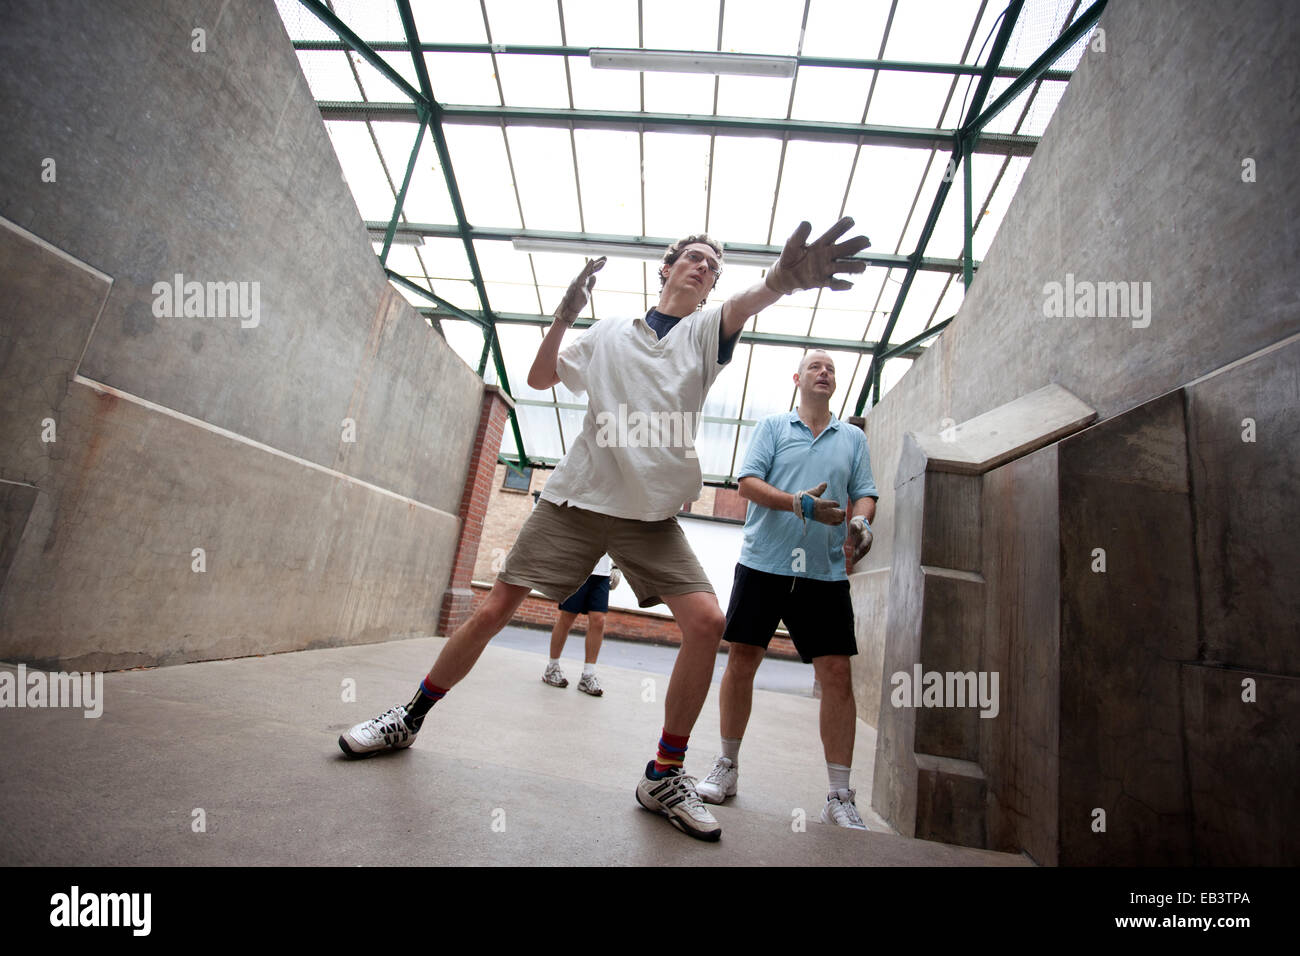 Eton Fives, handball game for two teams of two glove-wearing players, originally developed at Eton College, England, UK Stock Photo